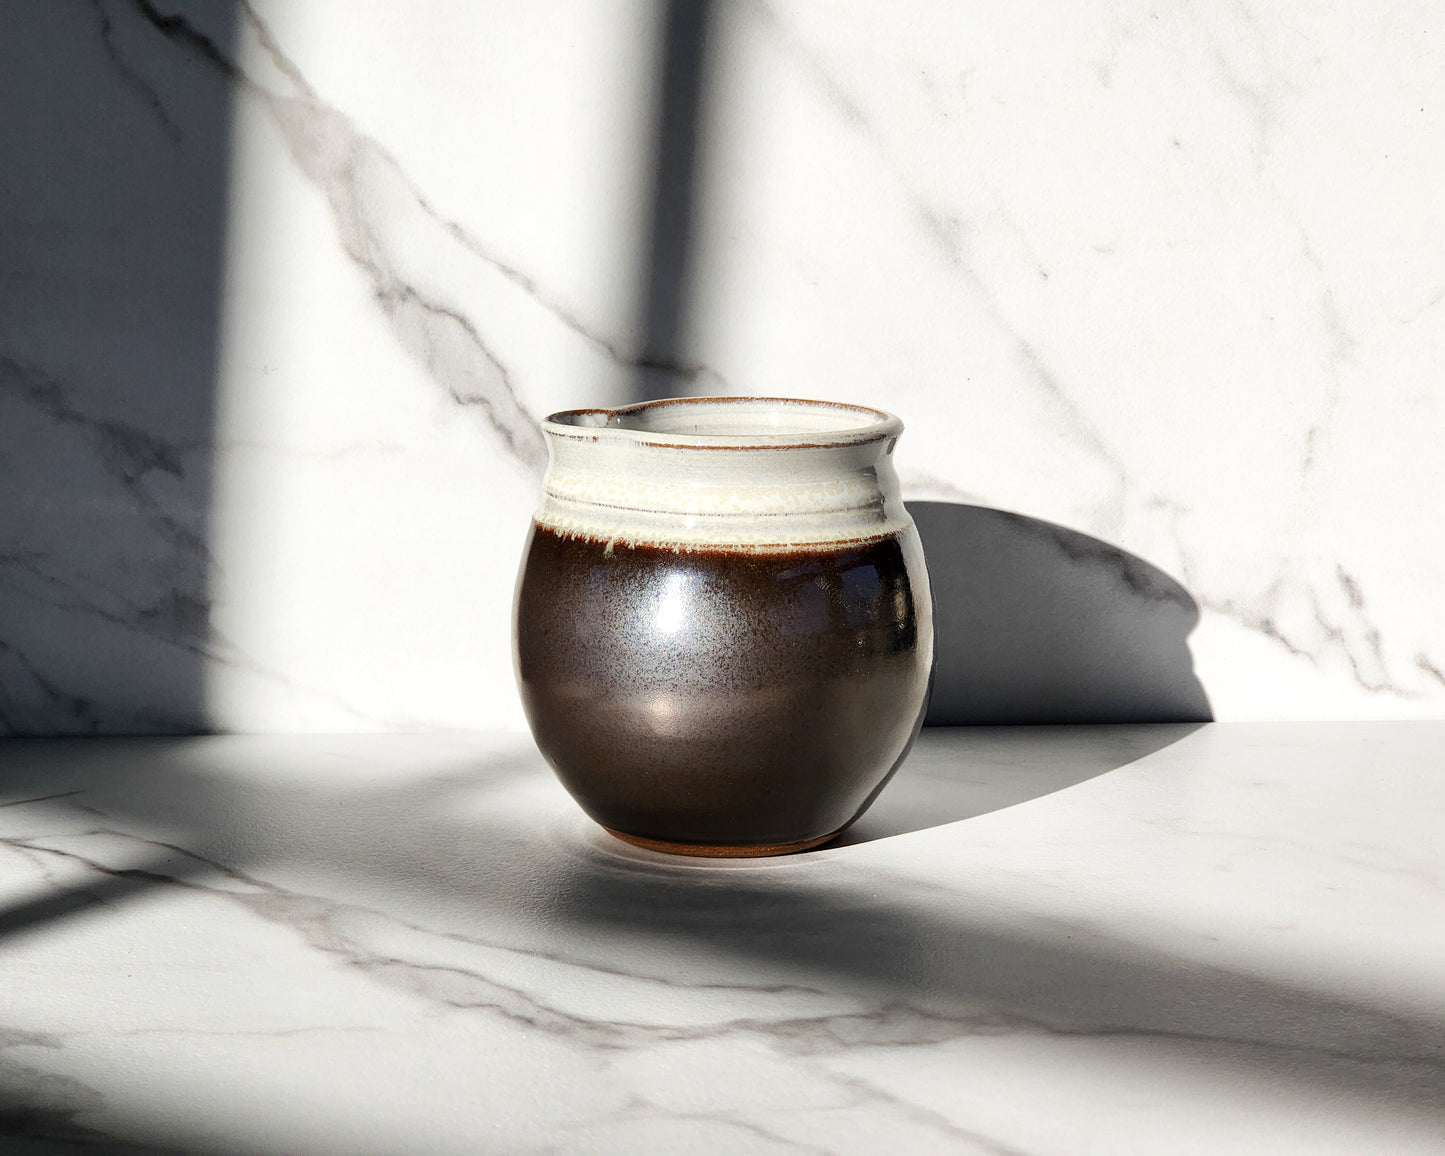  Image Description: A Licorice creamer from Clinton Pottery rests gracefully on a table, its deep black color exuding sophistication and elegance. With its sleek design and smooth finish, this creamer adds a touch of modern refinement to any tabletop. Ideal for serving cream or milk alongside coffee or tea.